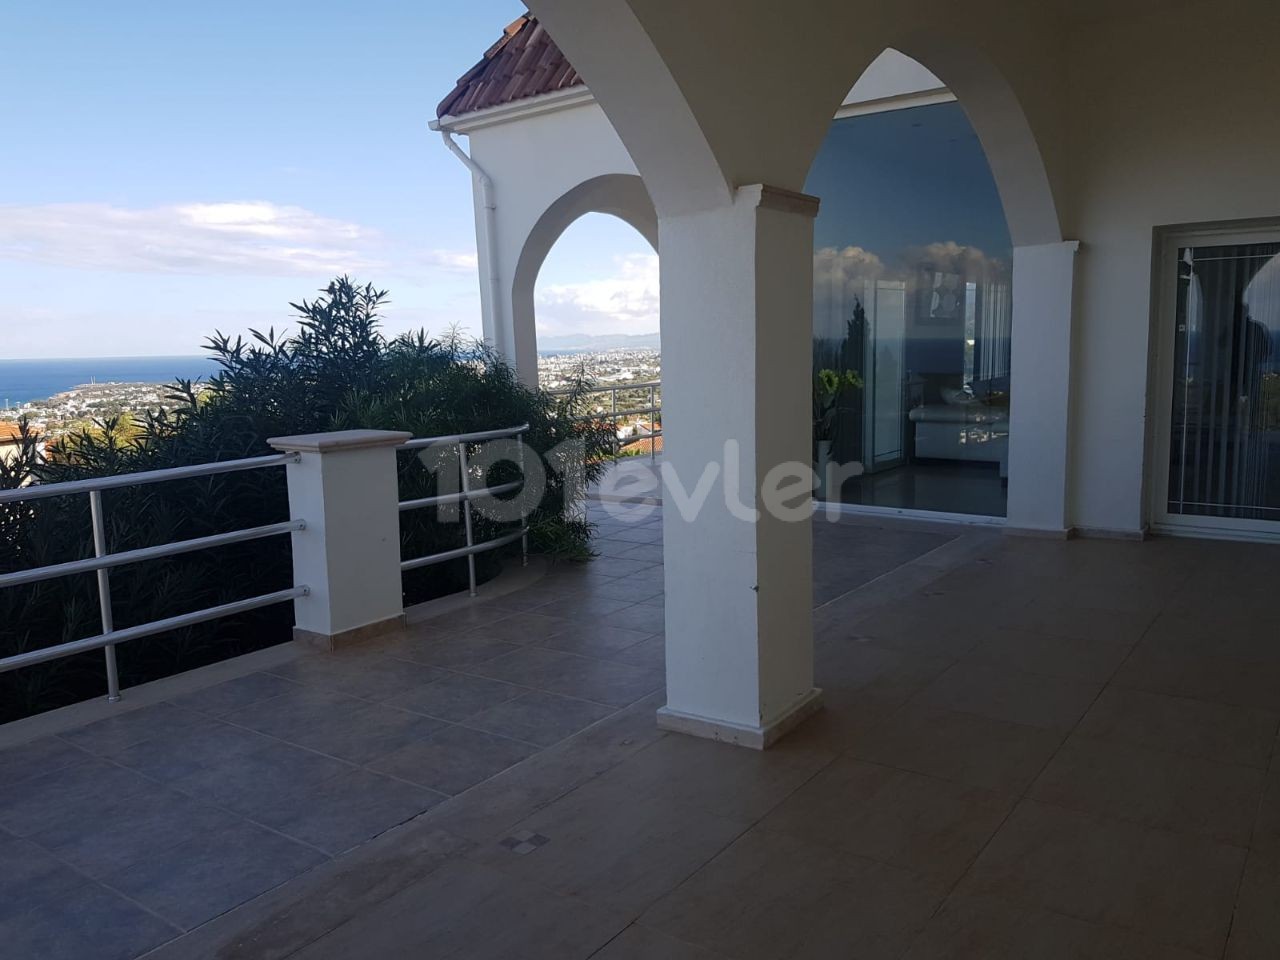 4+2 villa with magnificent sea and mountain views for sale in Edremit